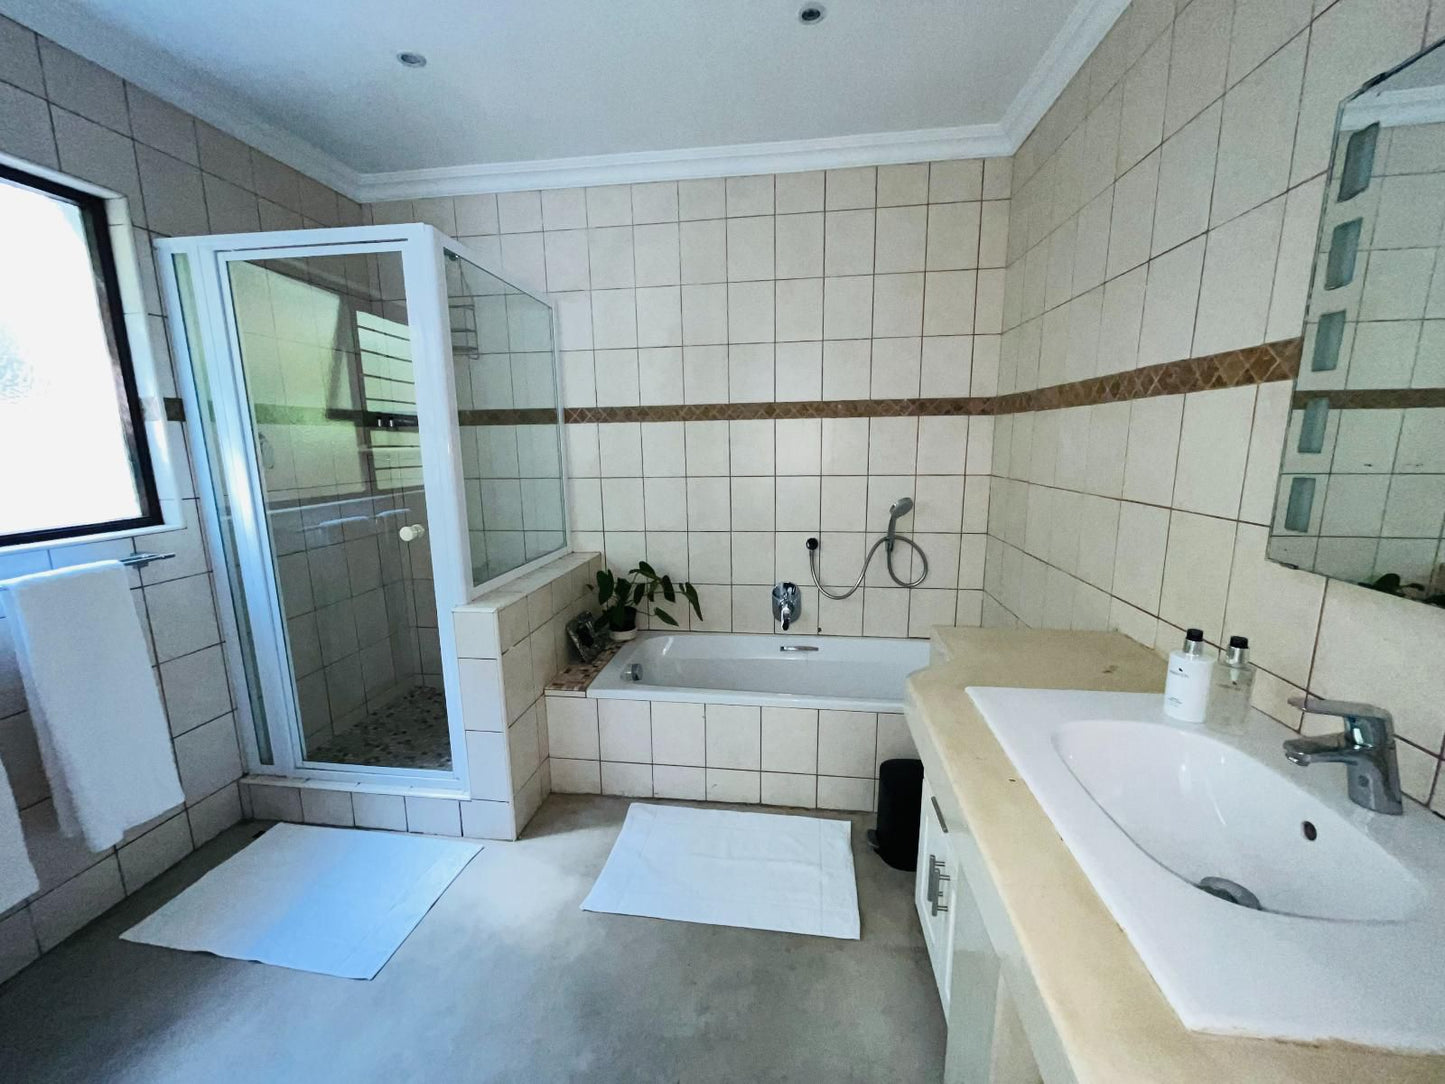 Summerhill Self Catering Accommodation St Francis Bay Eastern Cape South Africa Bathroom